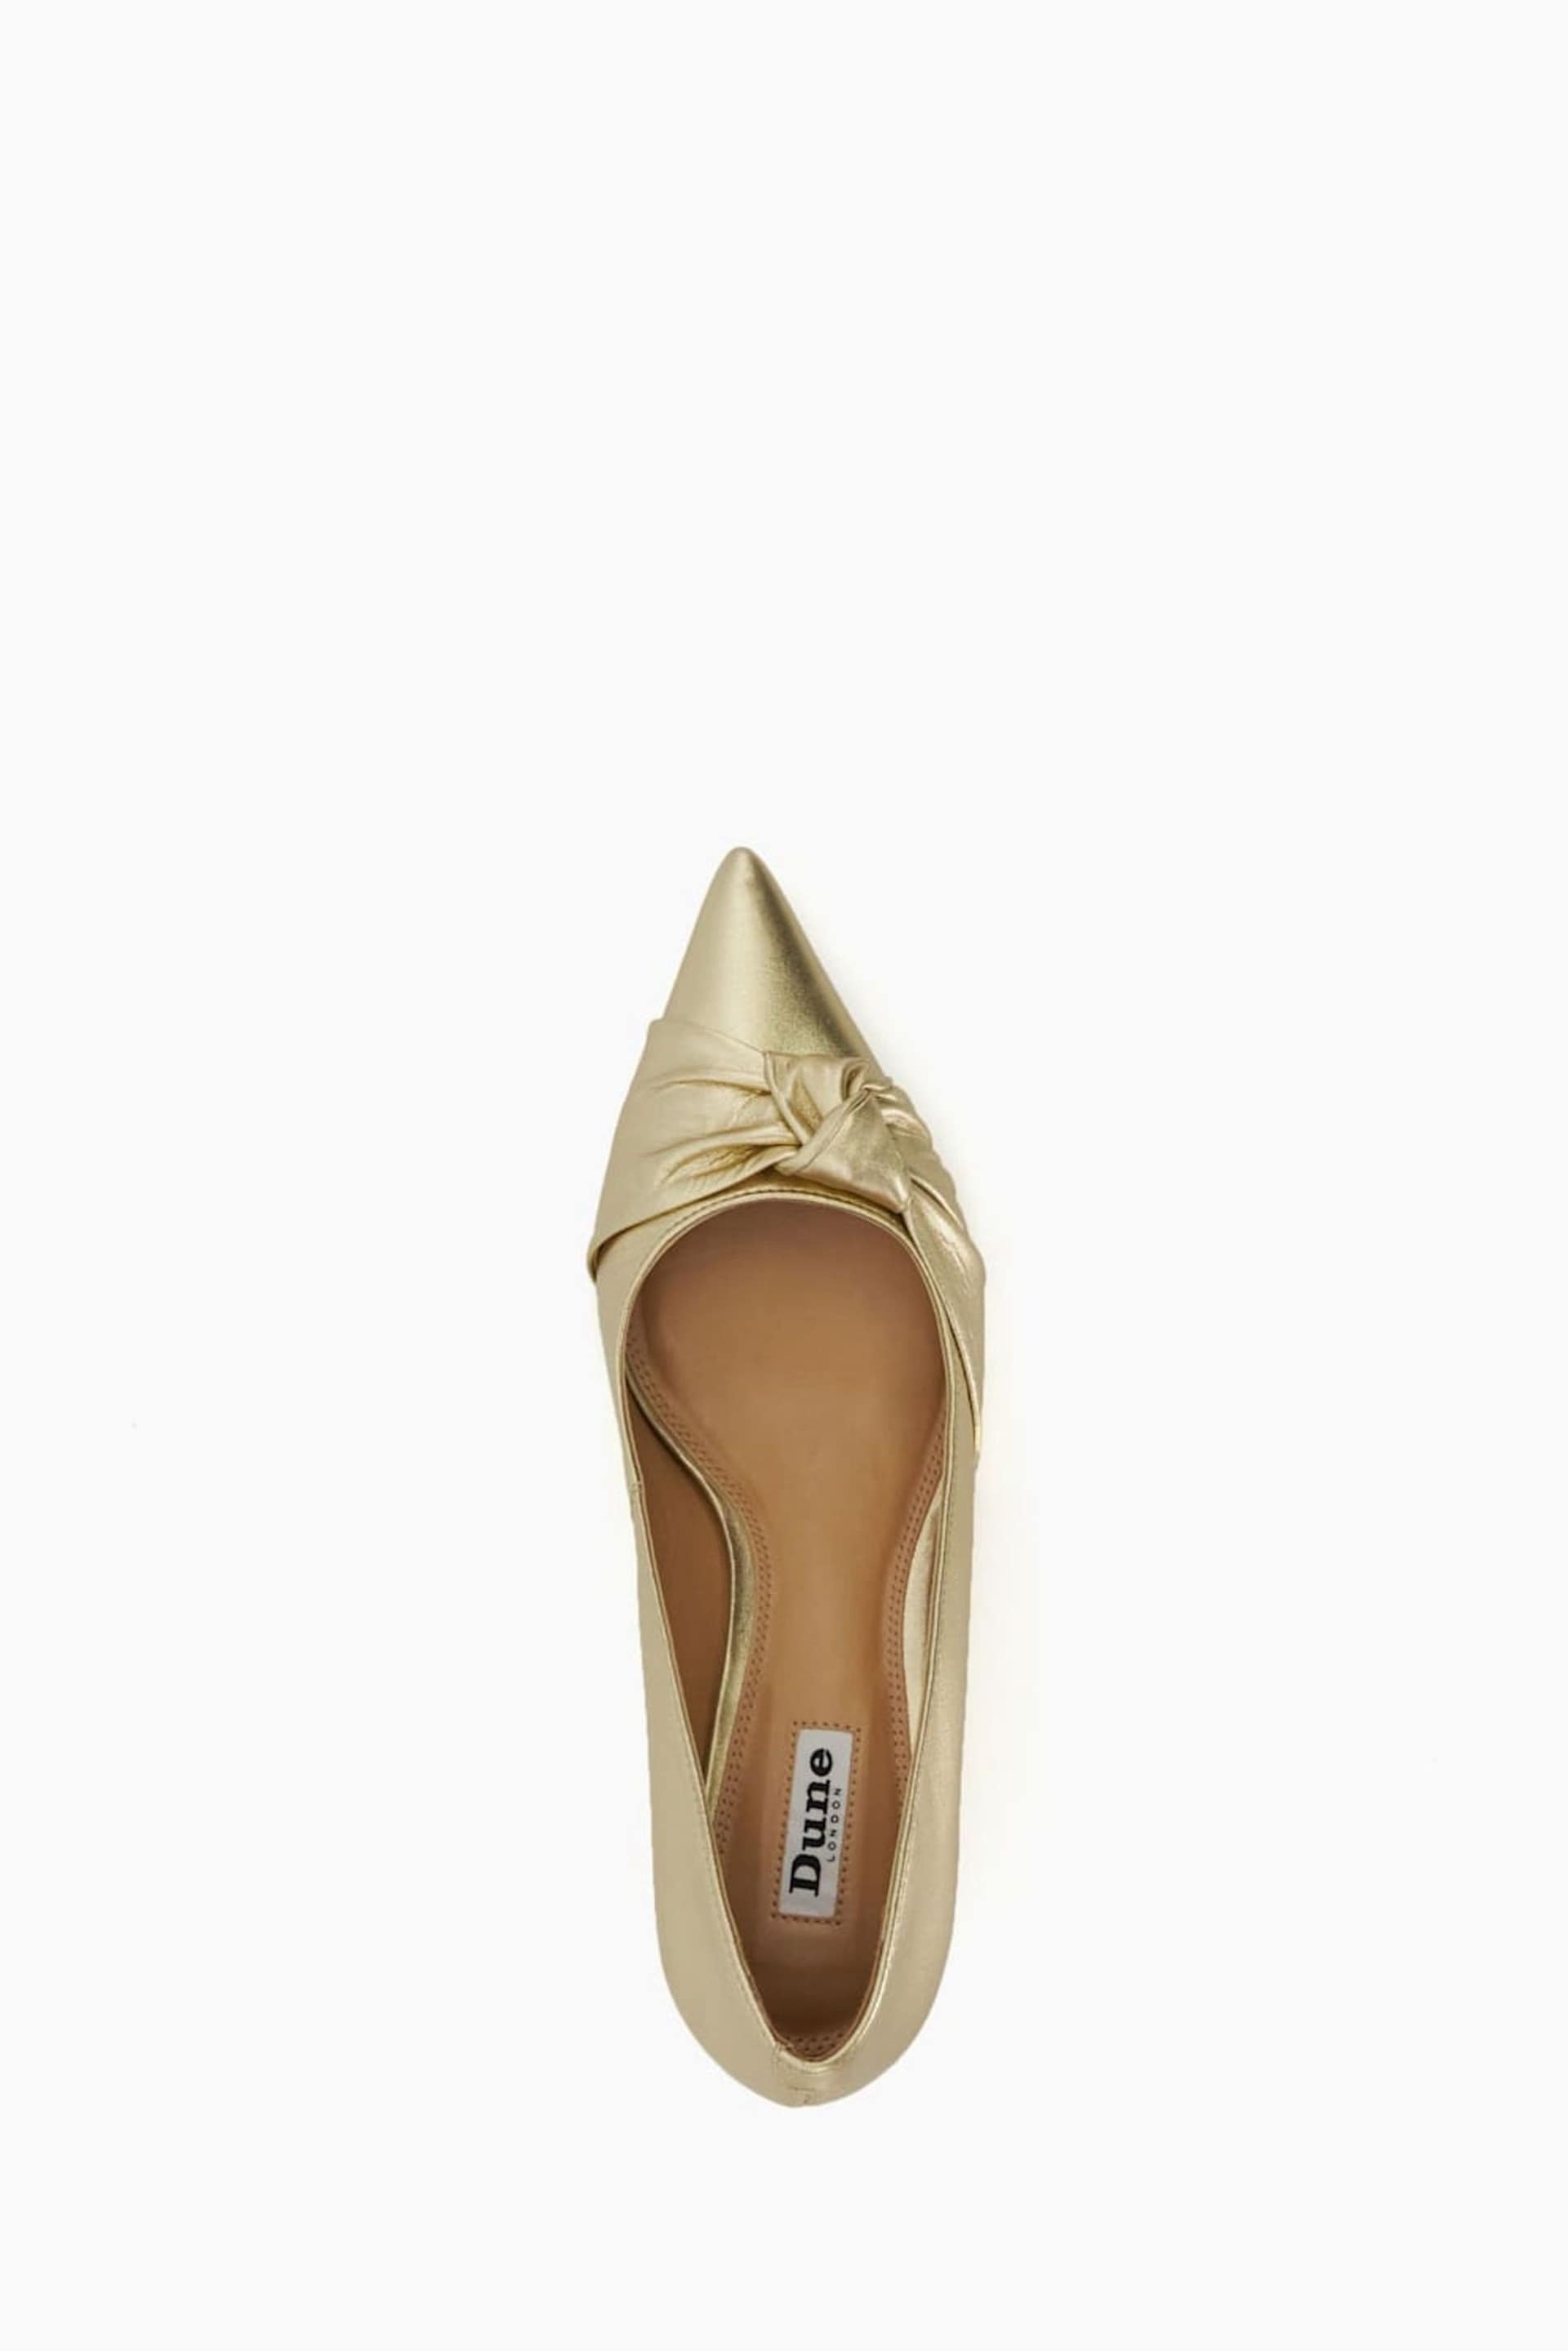 Dune London Gold Address Soft Knot Pointed Court Shoes - Image 6 of 6